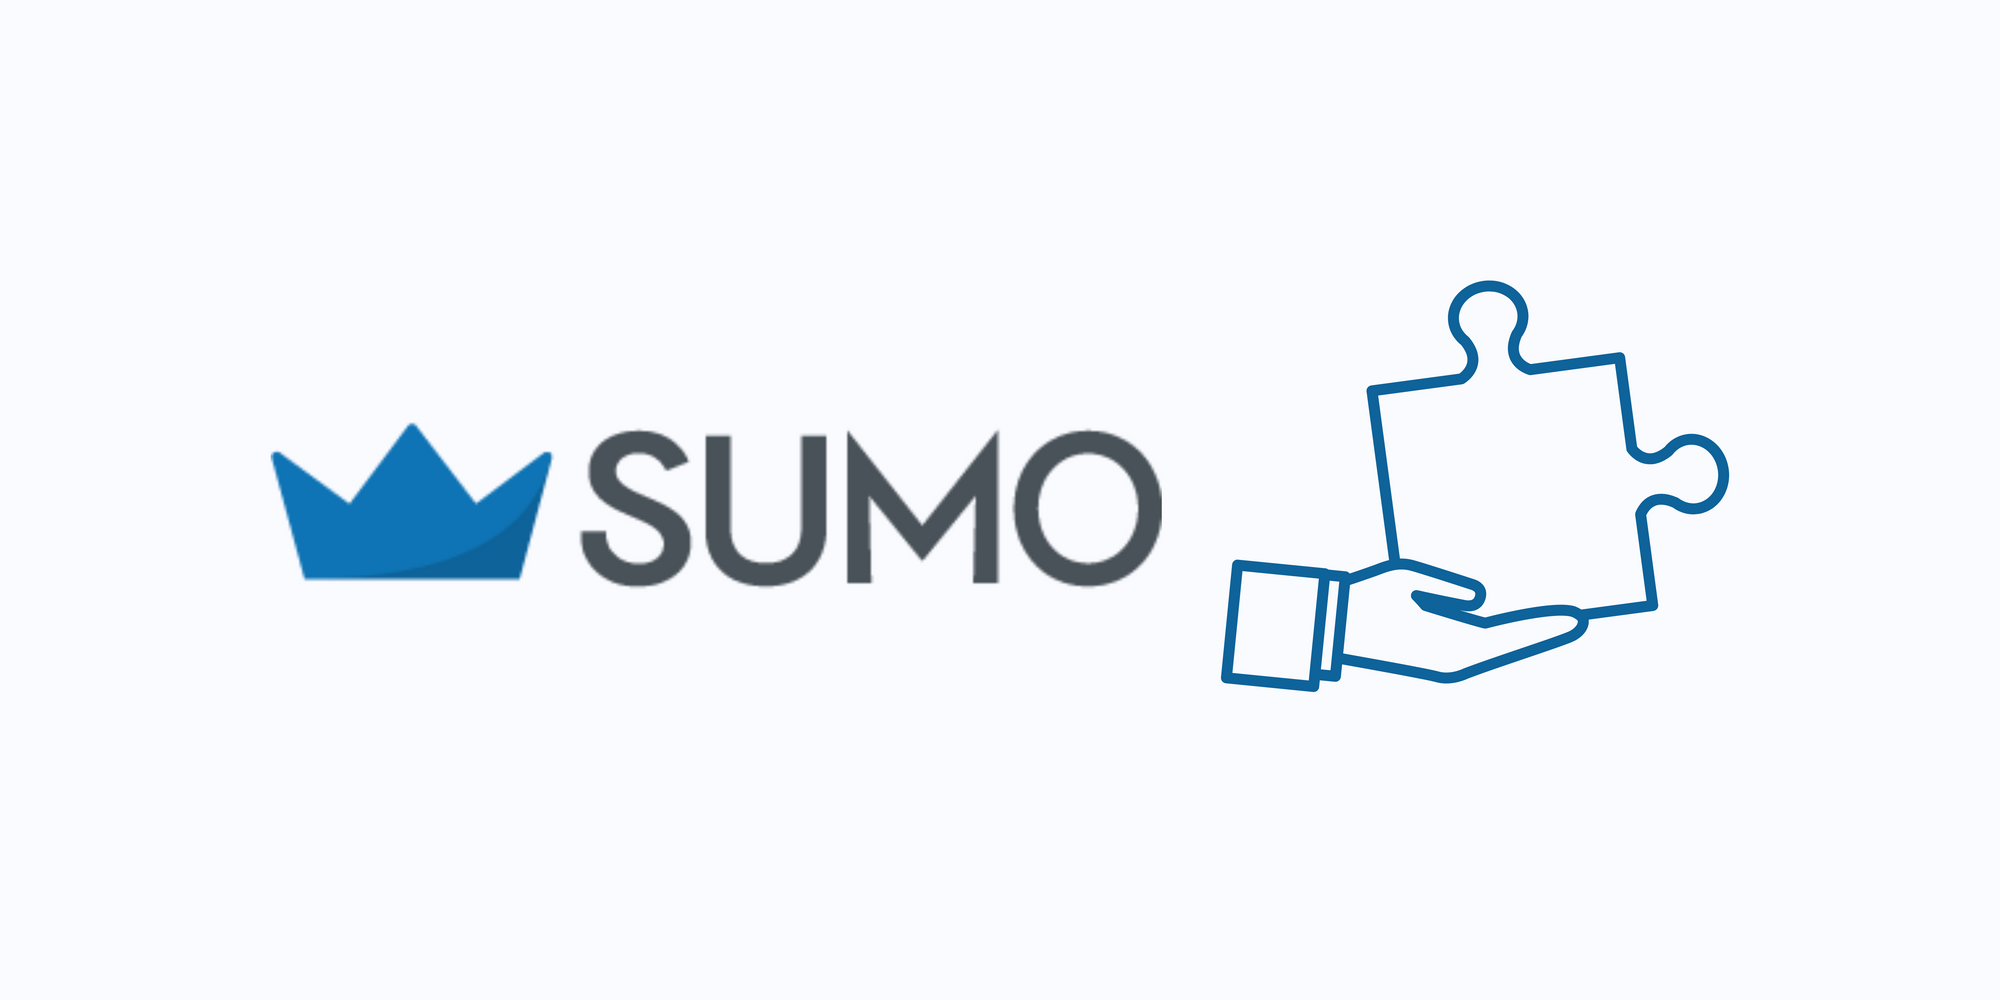 Sumo icon and a hand holding a jigsaw piece on blue background